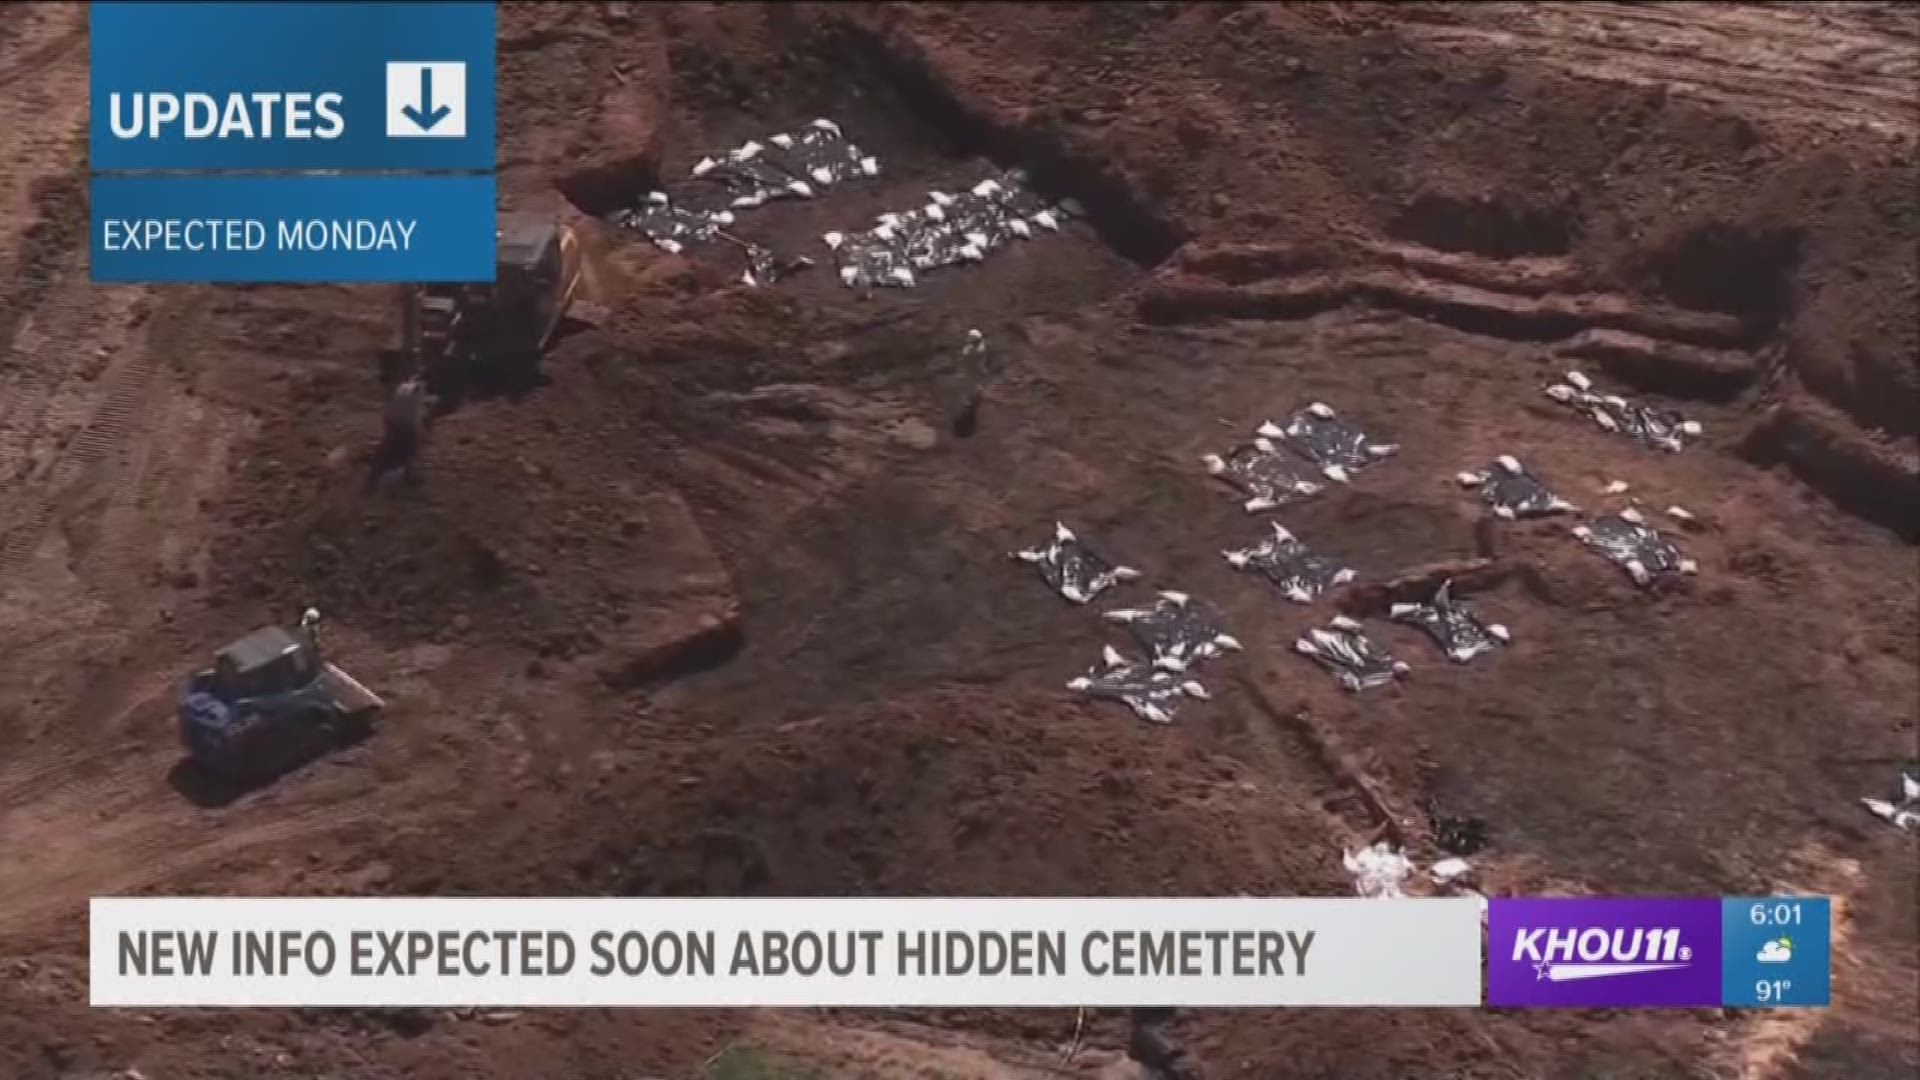 There is new information about a hidden cemetery in Fort Bend County.